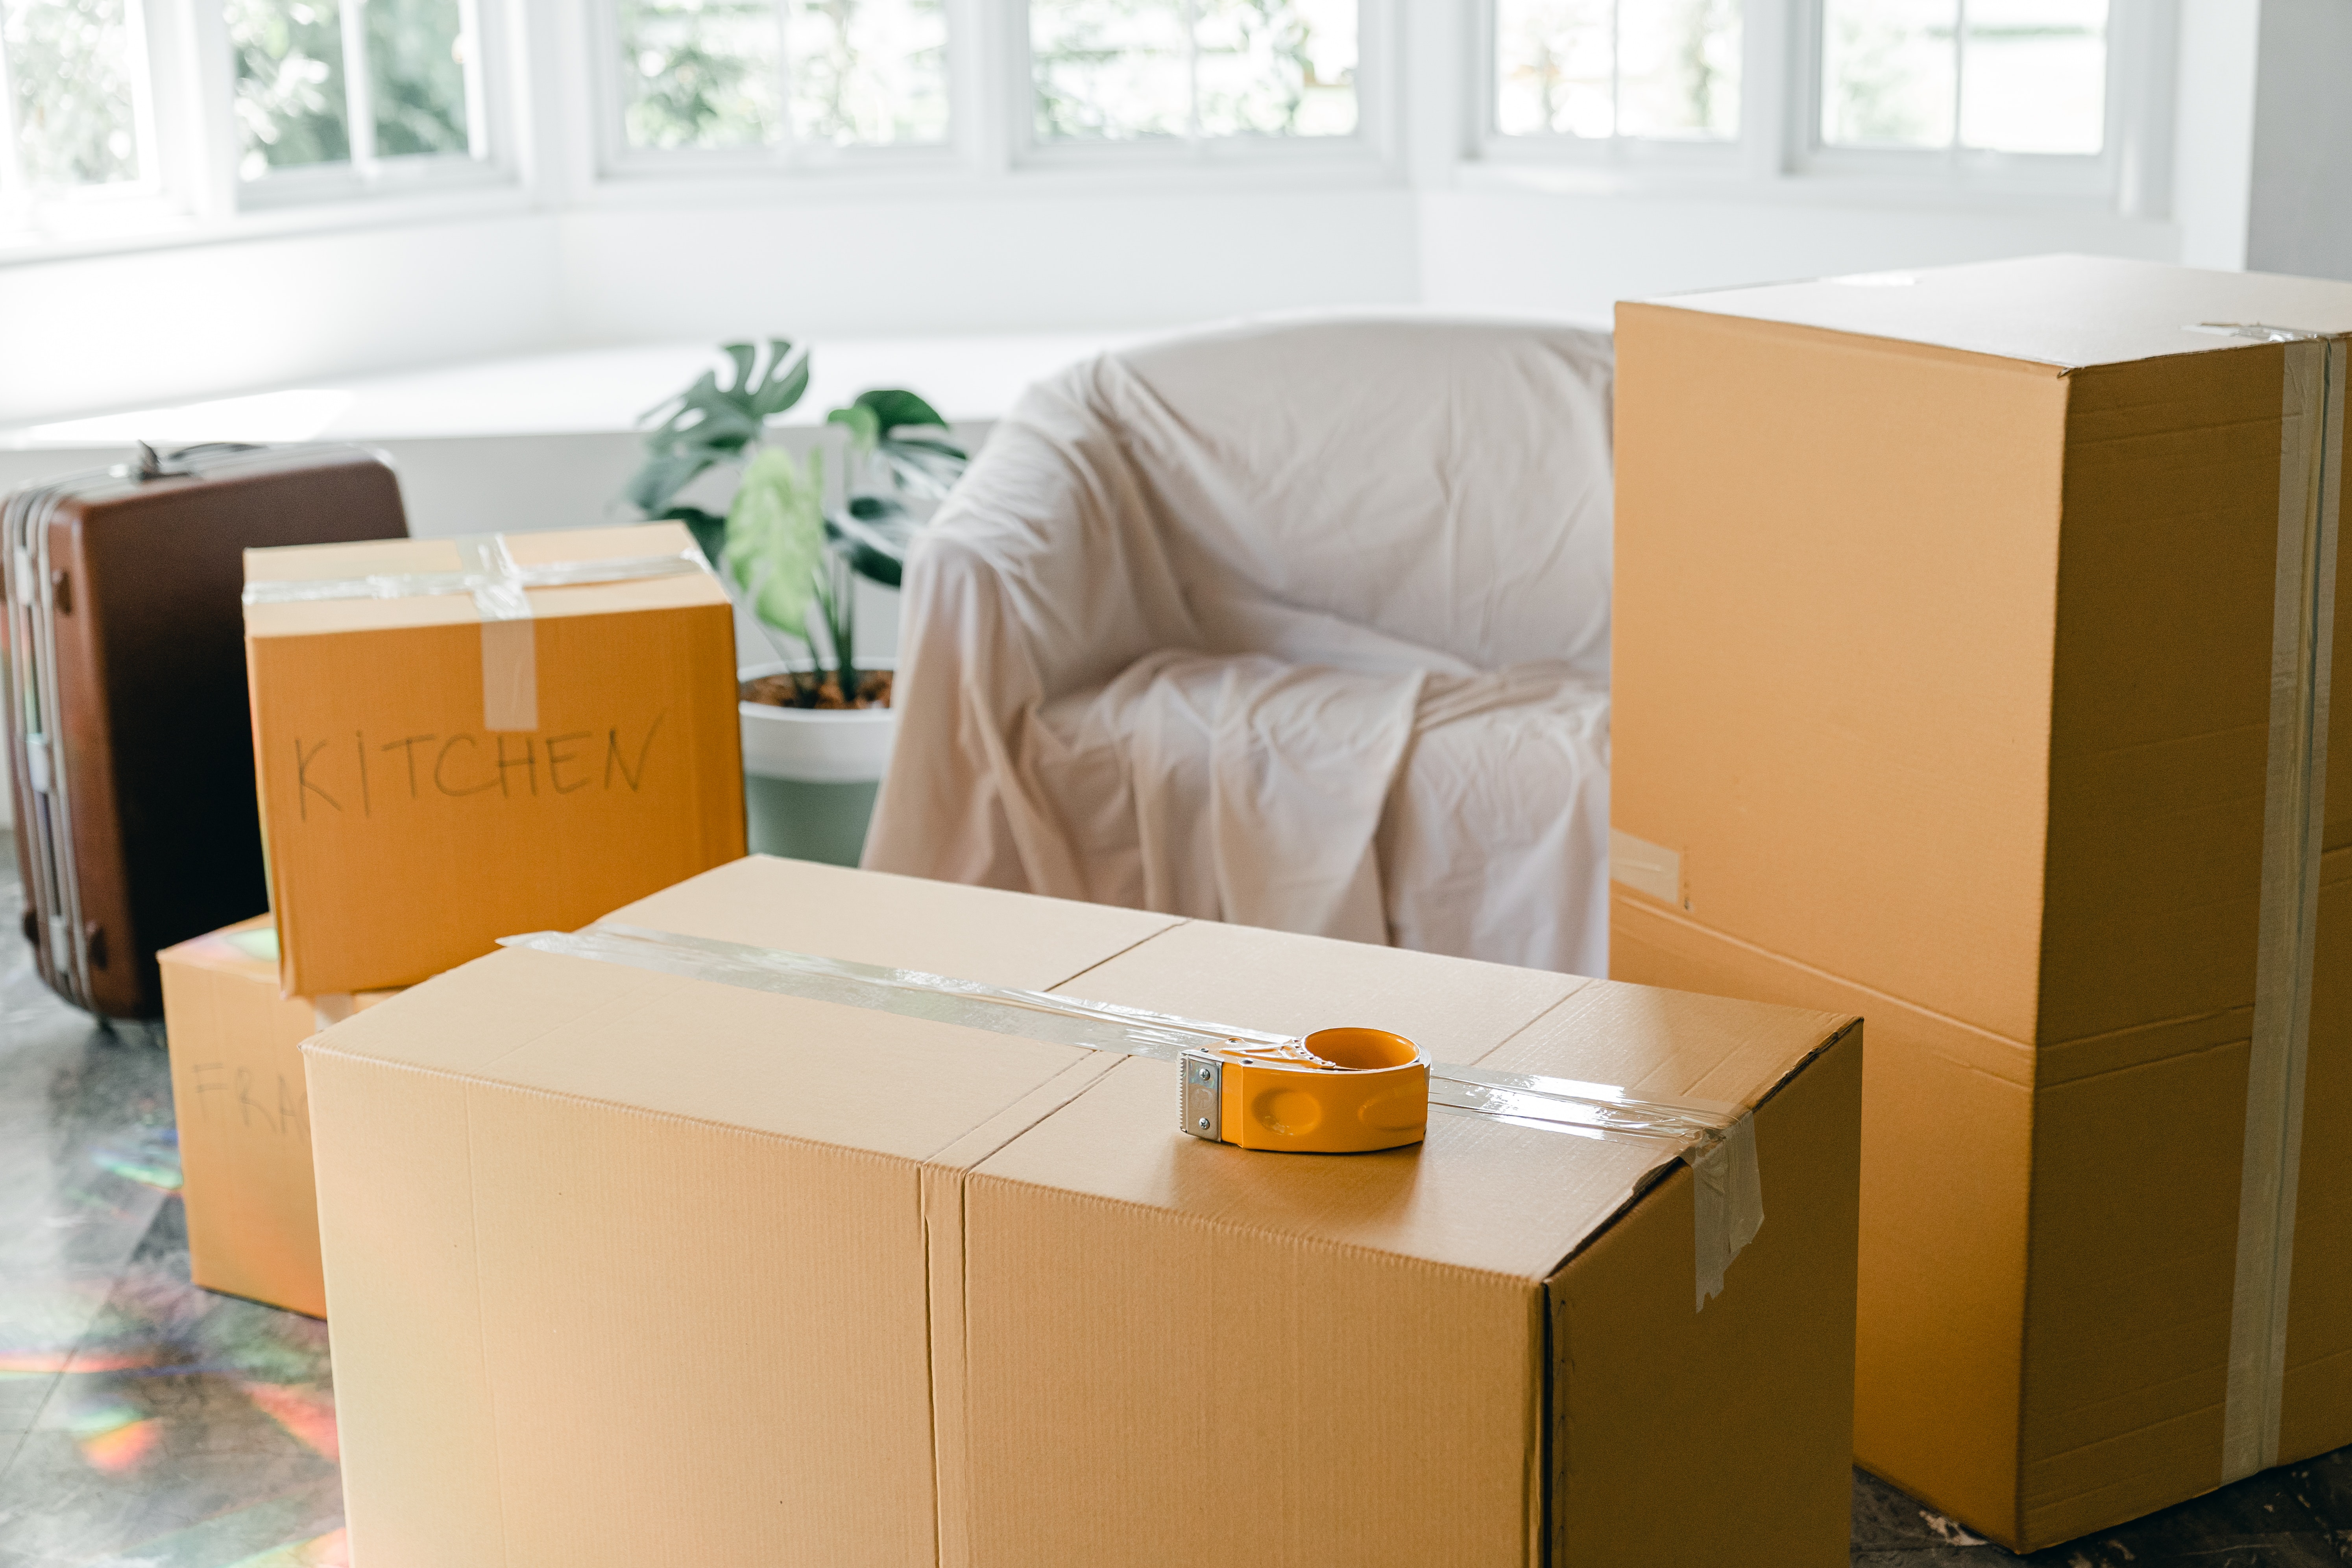 Professional Movers Making Sure Boxes Are Properly Packed in Sugar Land, Houston